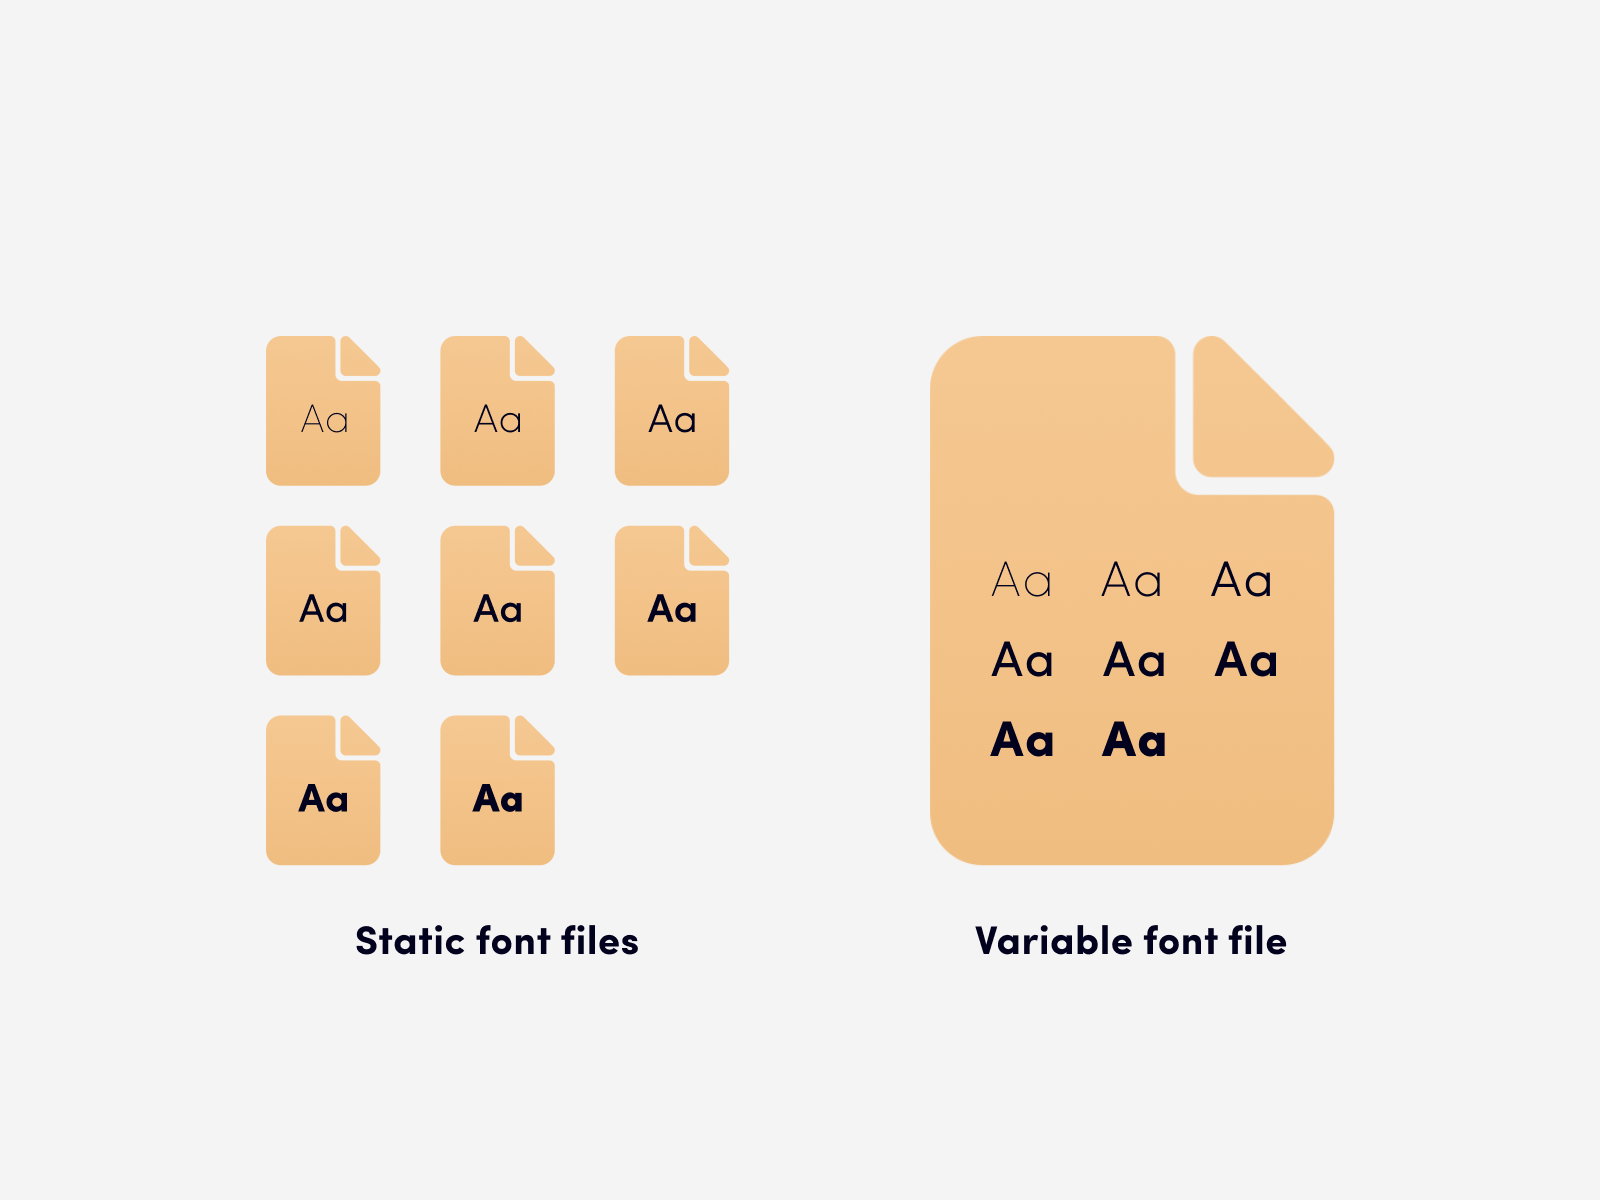 Different typefaces of static fonts are stored in separate files, however, when it comes to variable fonts, a single file is enough